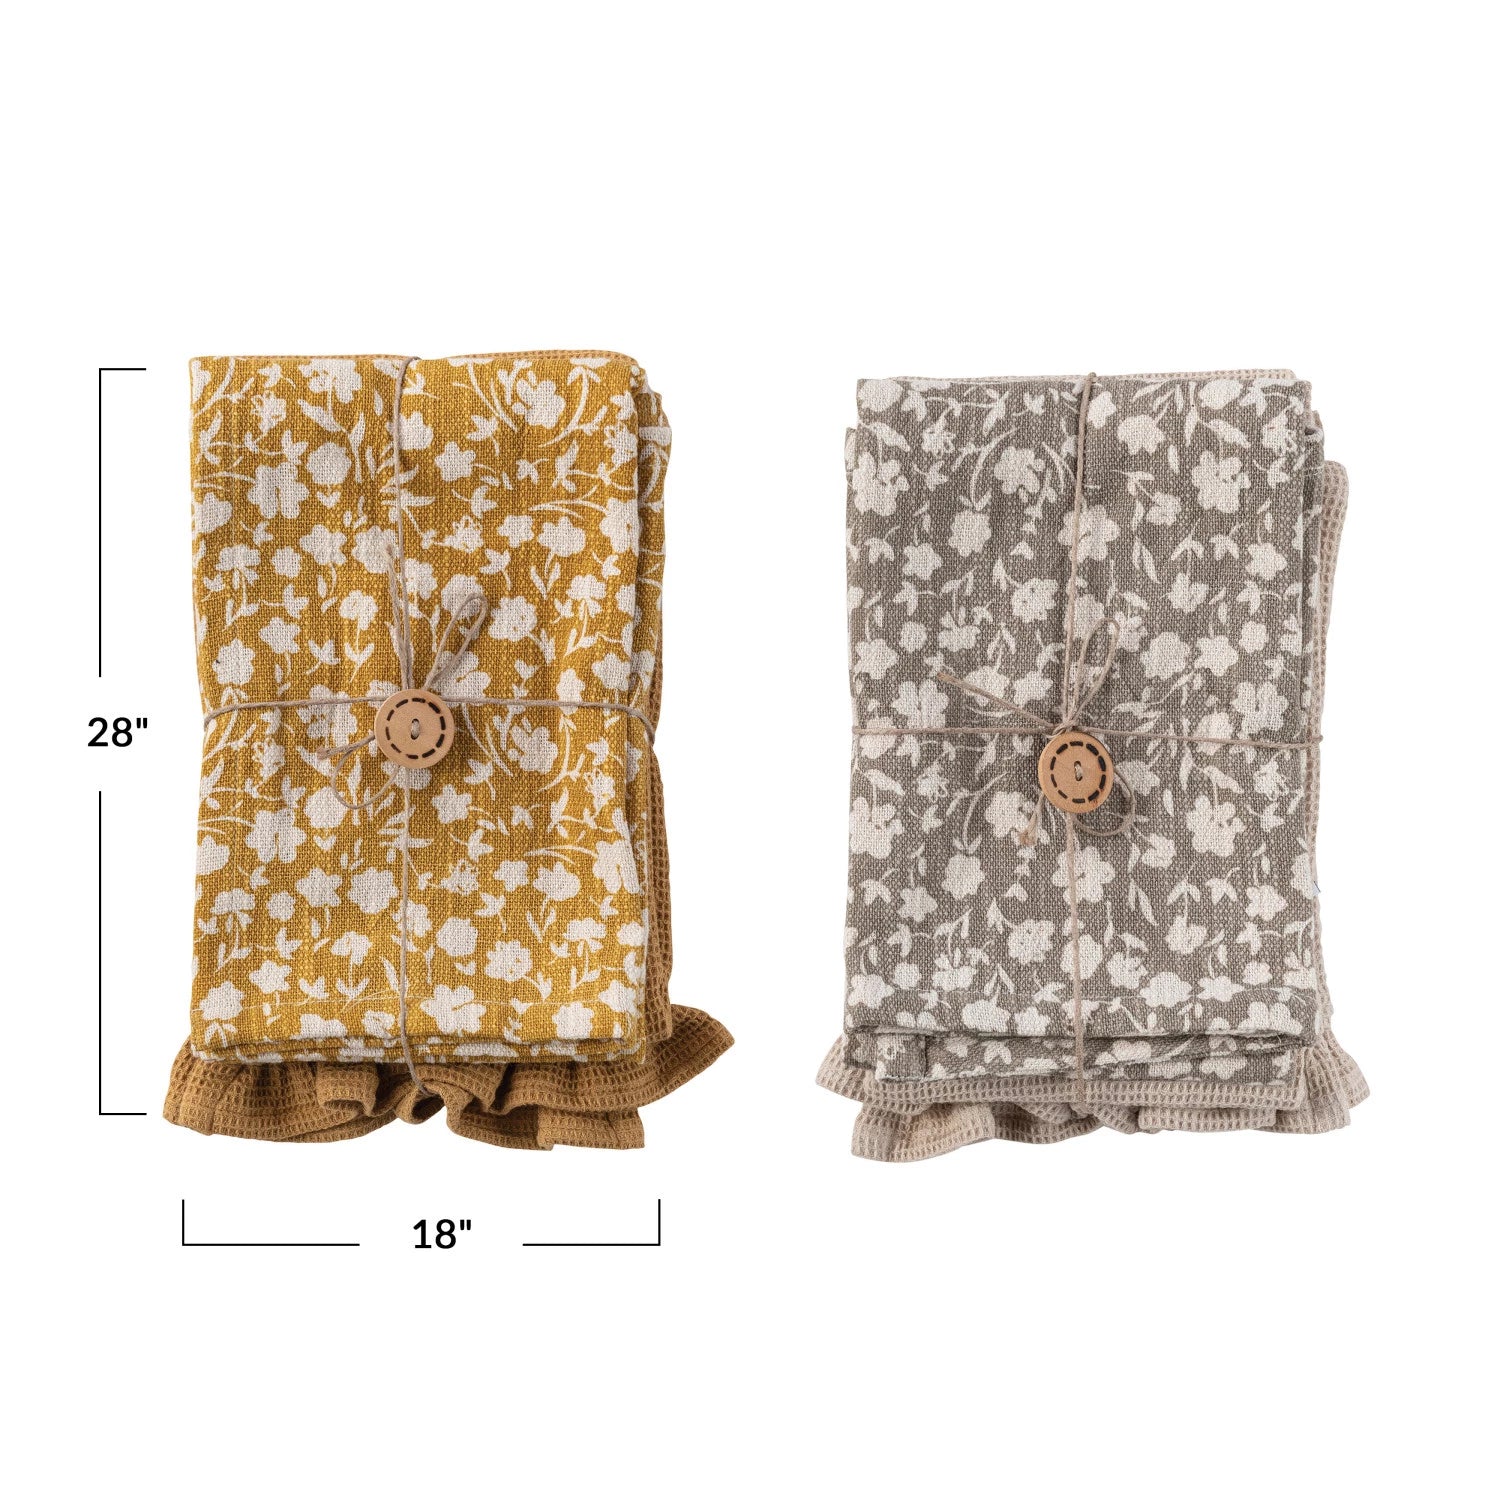 Measurements of the Set of two cotton slub printed and cotton waffle tea towels in the colors mustard and grey.